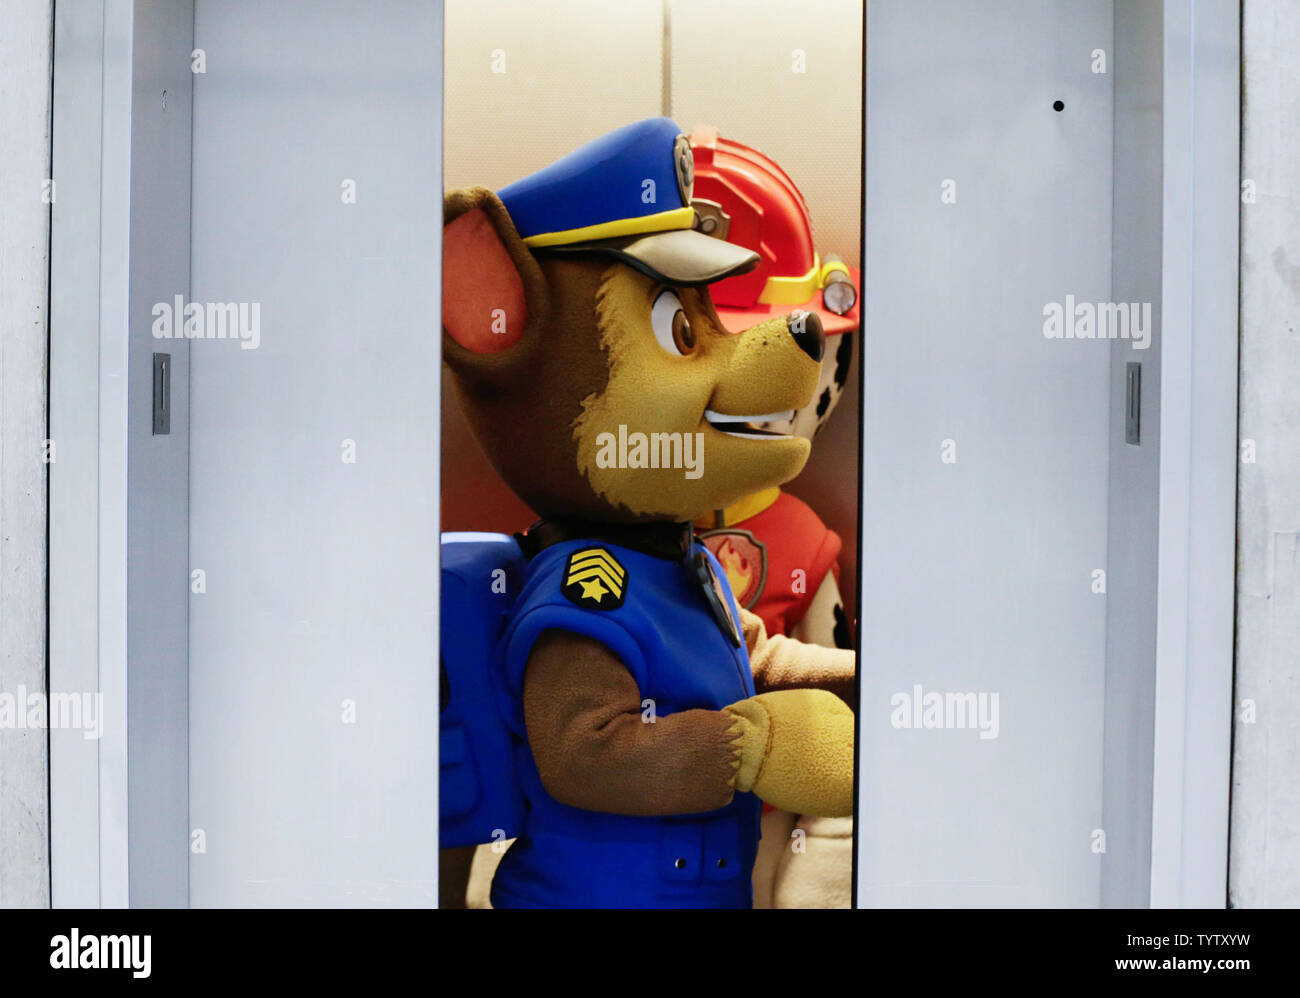 Paw Patrol characters get into an elevator at the at 116th American  International Toy Fair at the Jacob K. Javits Convention Center in New York  City on February 16, 2019. This is